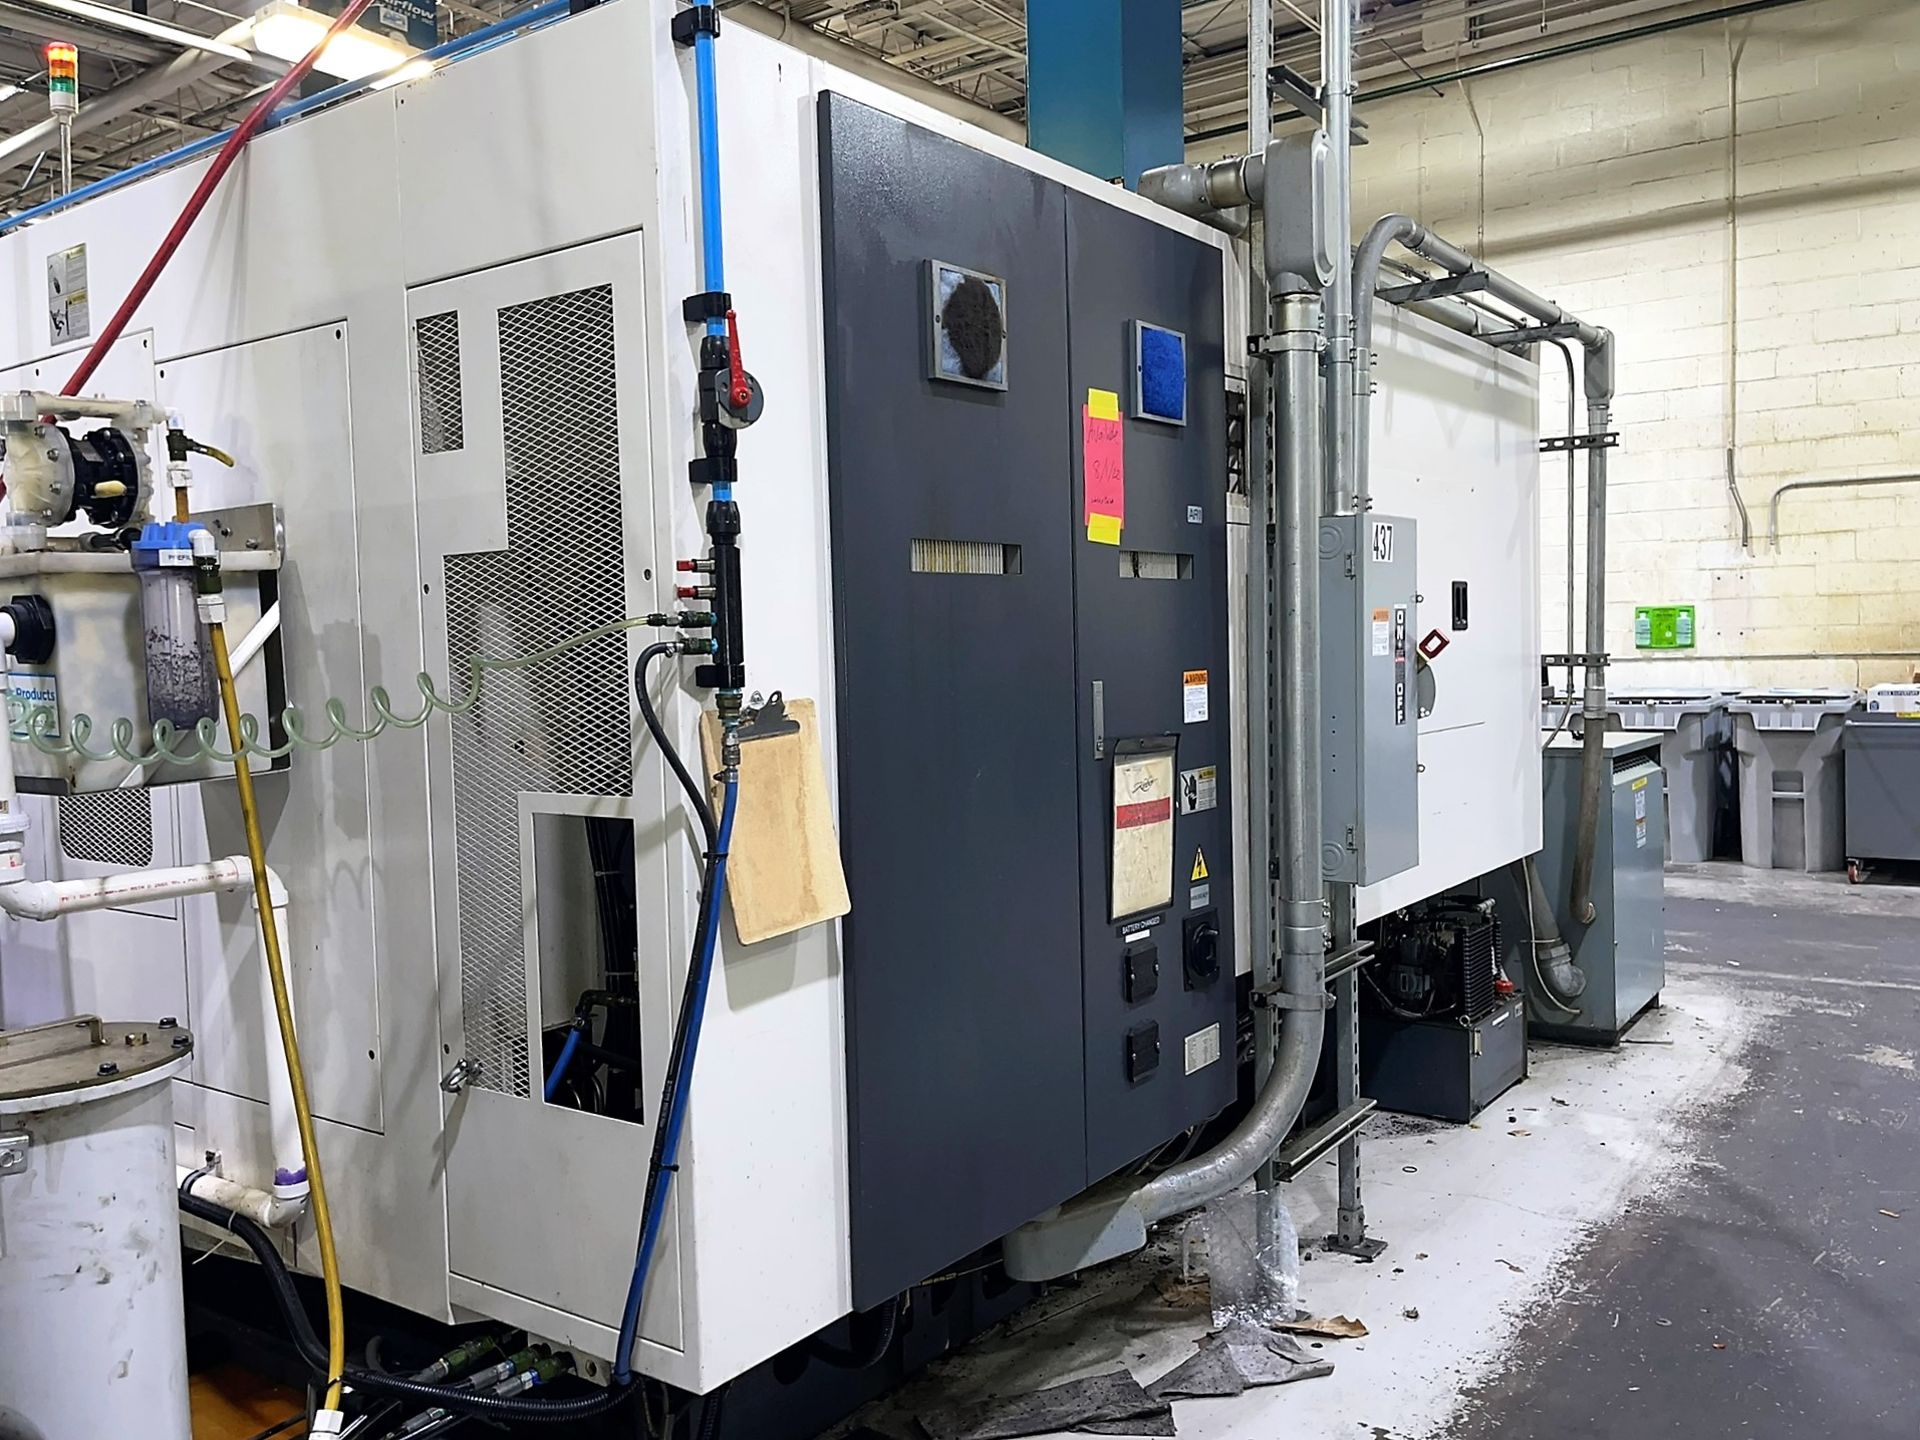 2012 Nakamura Super-Mill WY-250L 10-Axis CNC Turning/Milling Center, S/N N280204 - Image 9 of 22